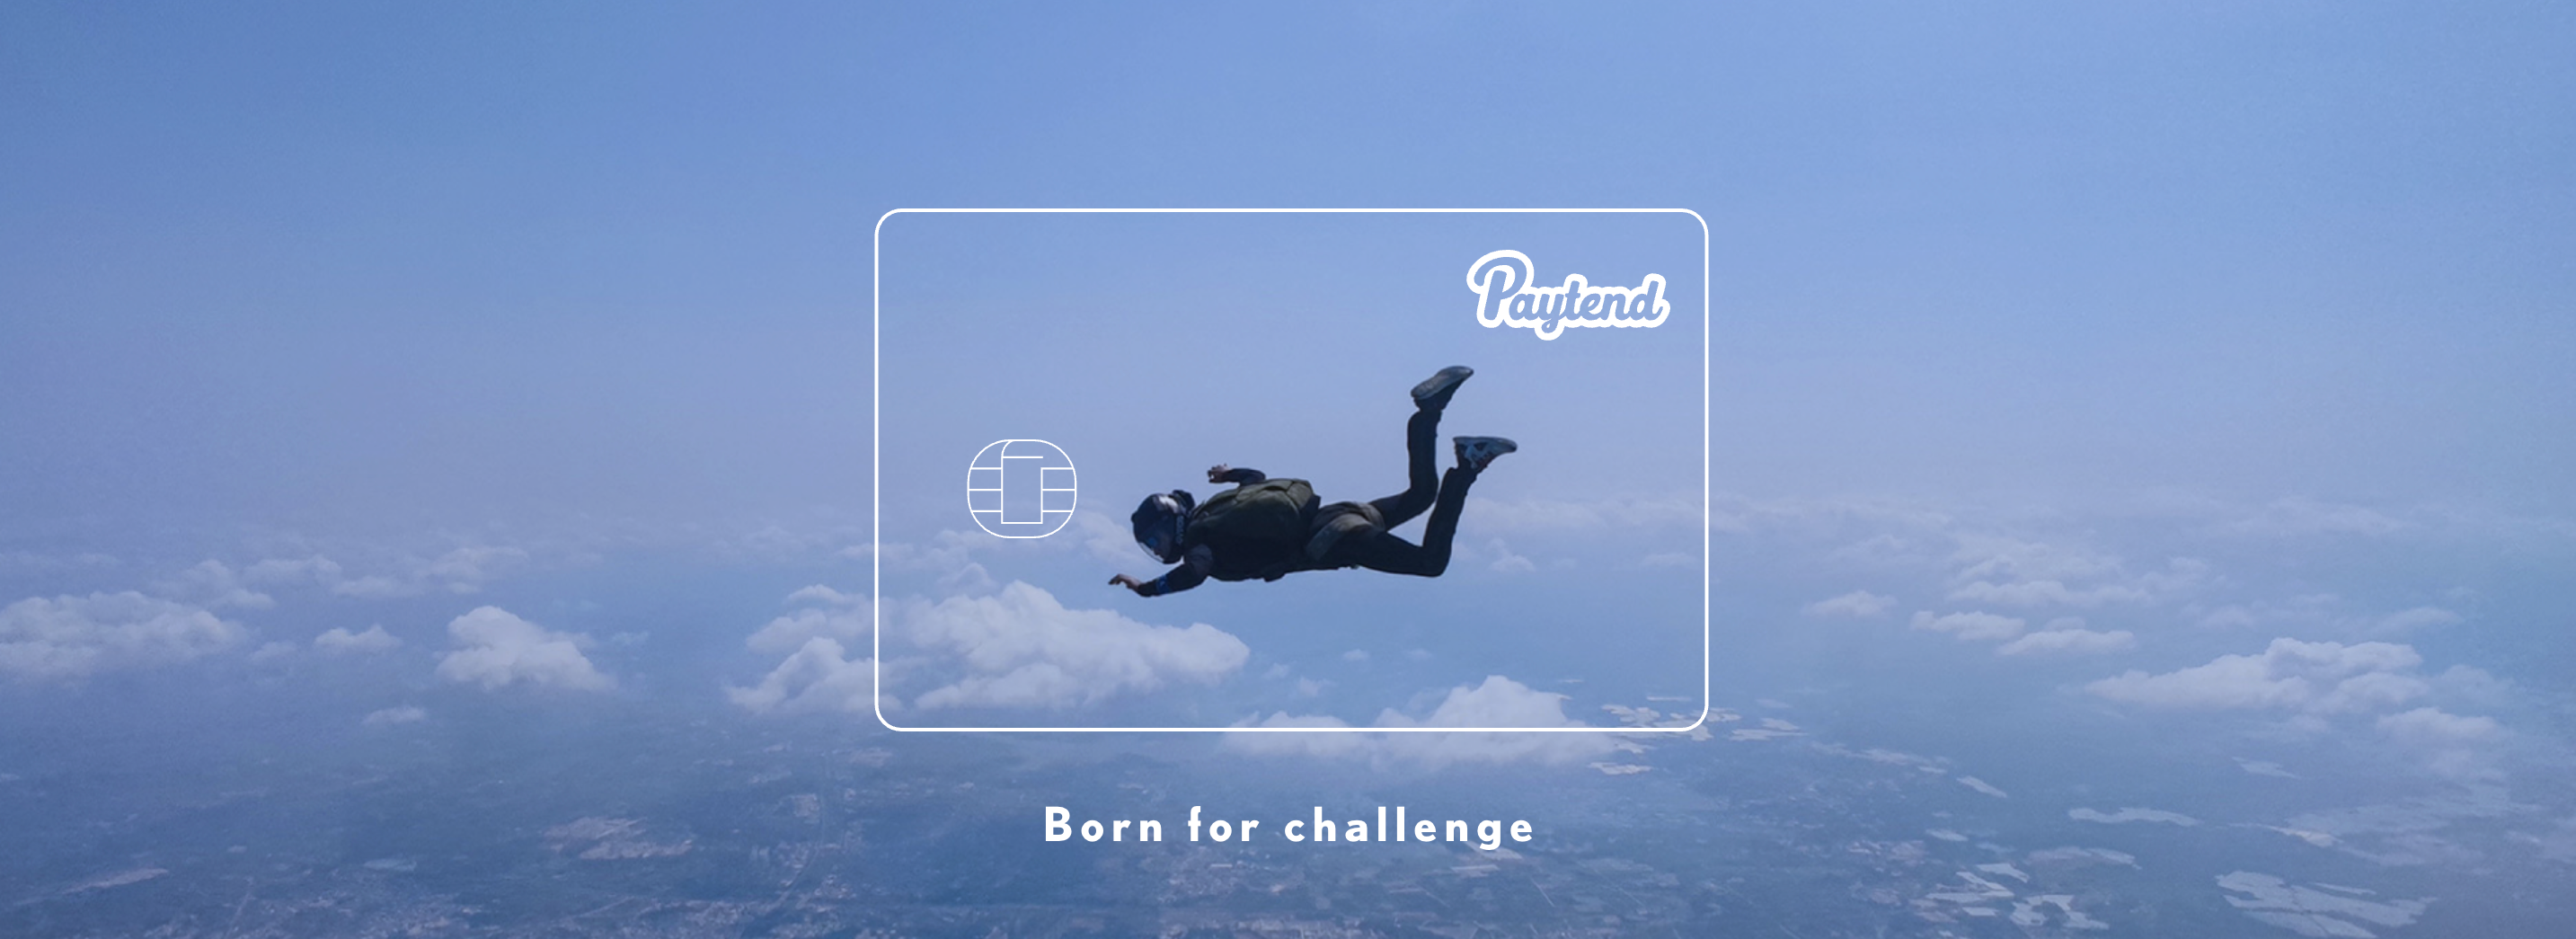 About Paytend